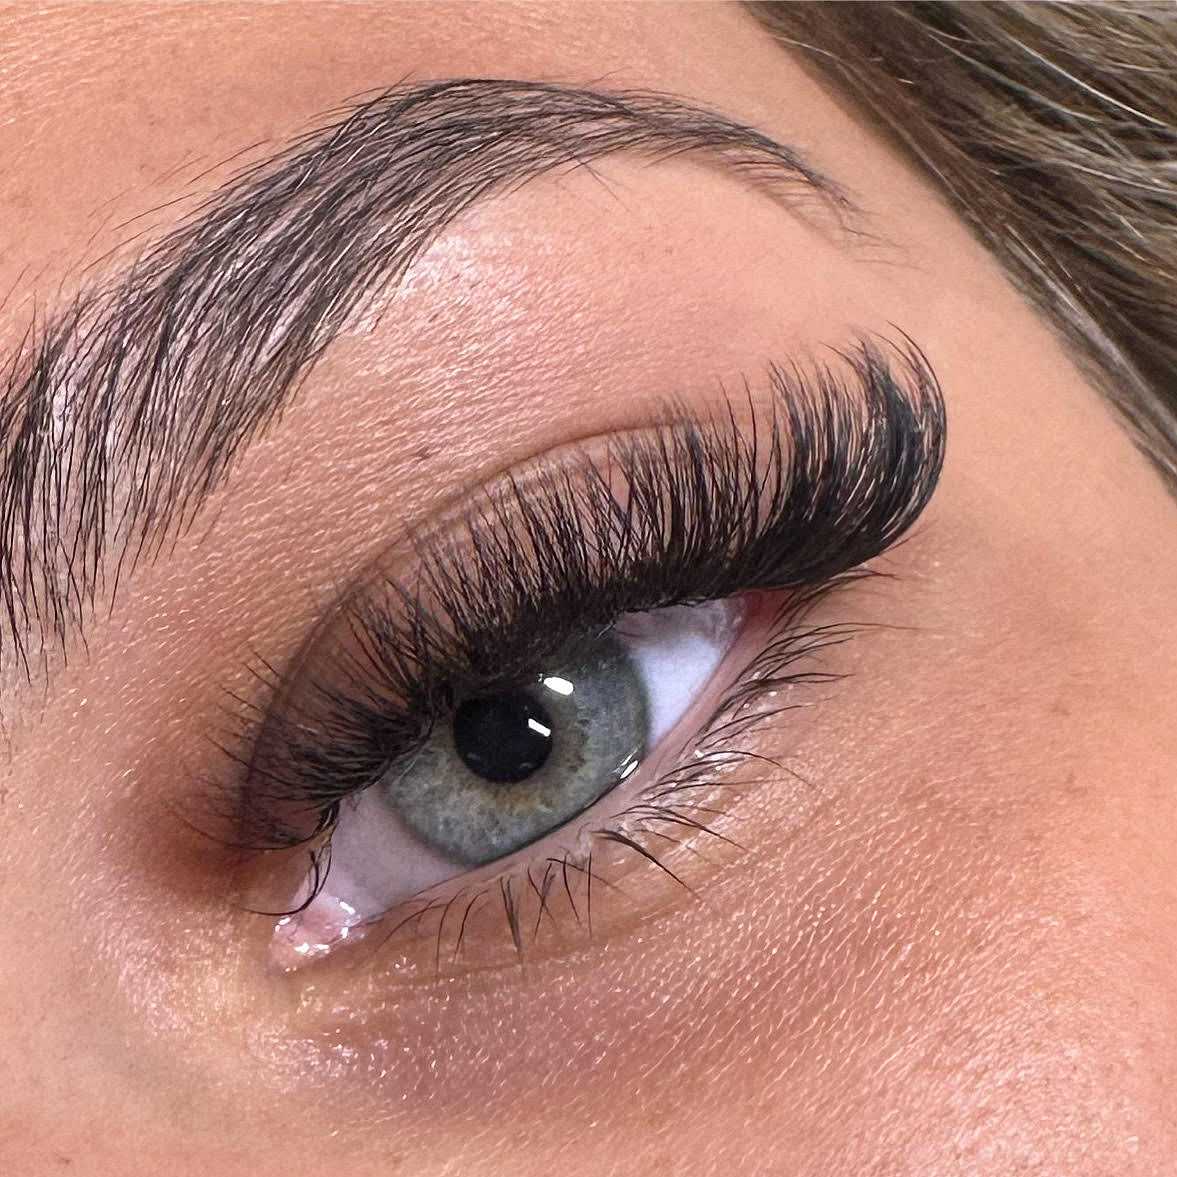 Close-up image of a woman's eye with lush, full lashes fanning outwards to display Salon Kathleen's high-quality lash extension options. Long, dark lashes uniformly coat the upper lash line for a thick, voluminous look.